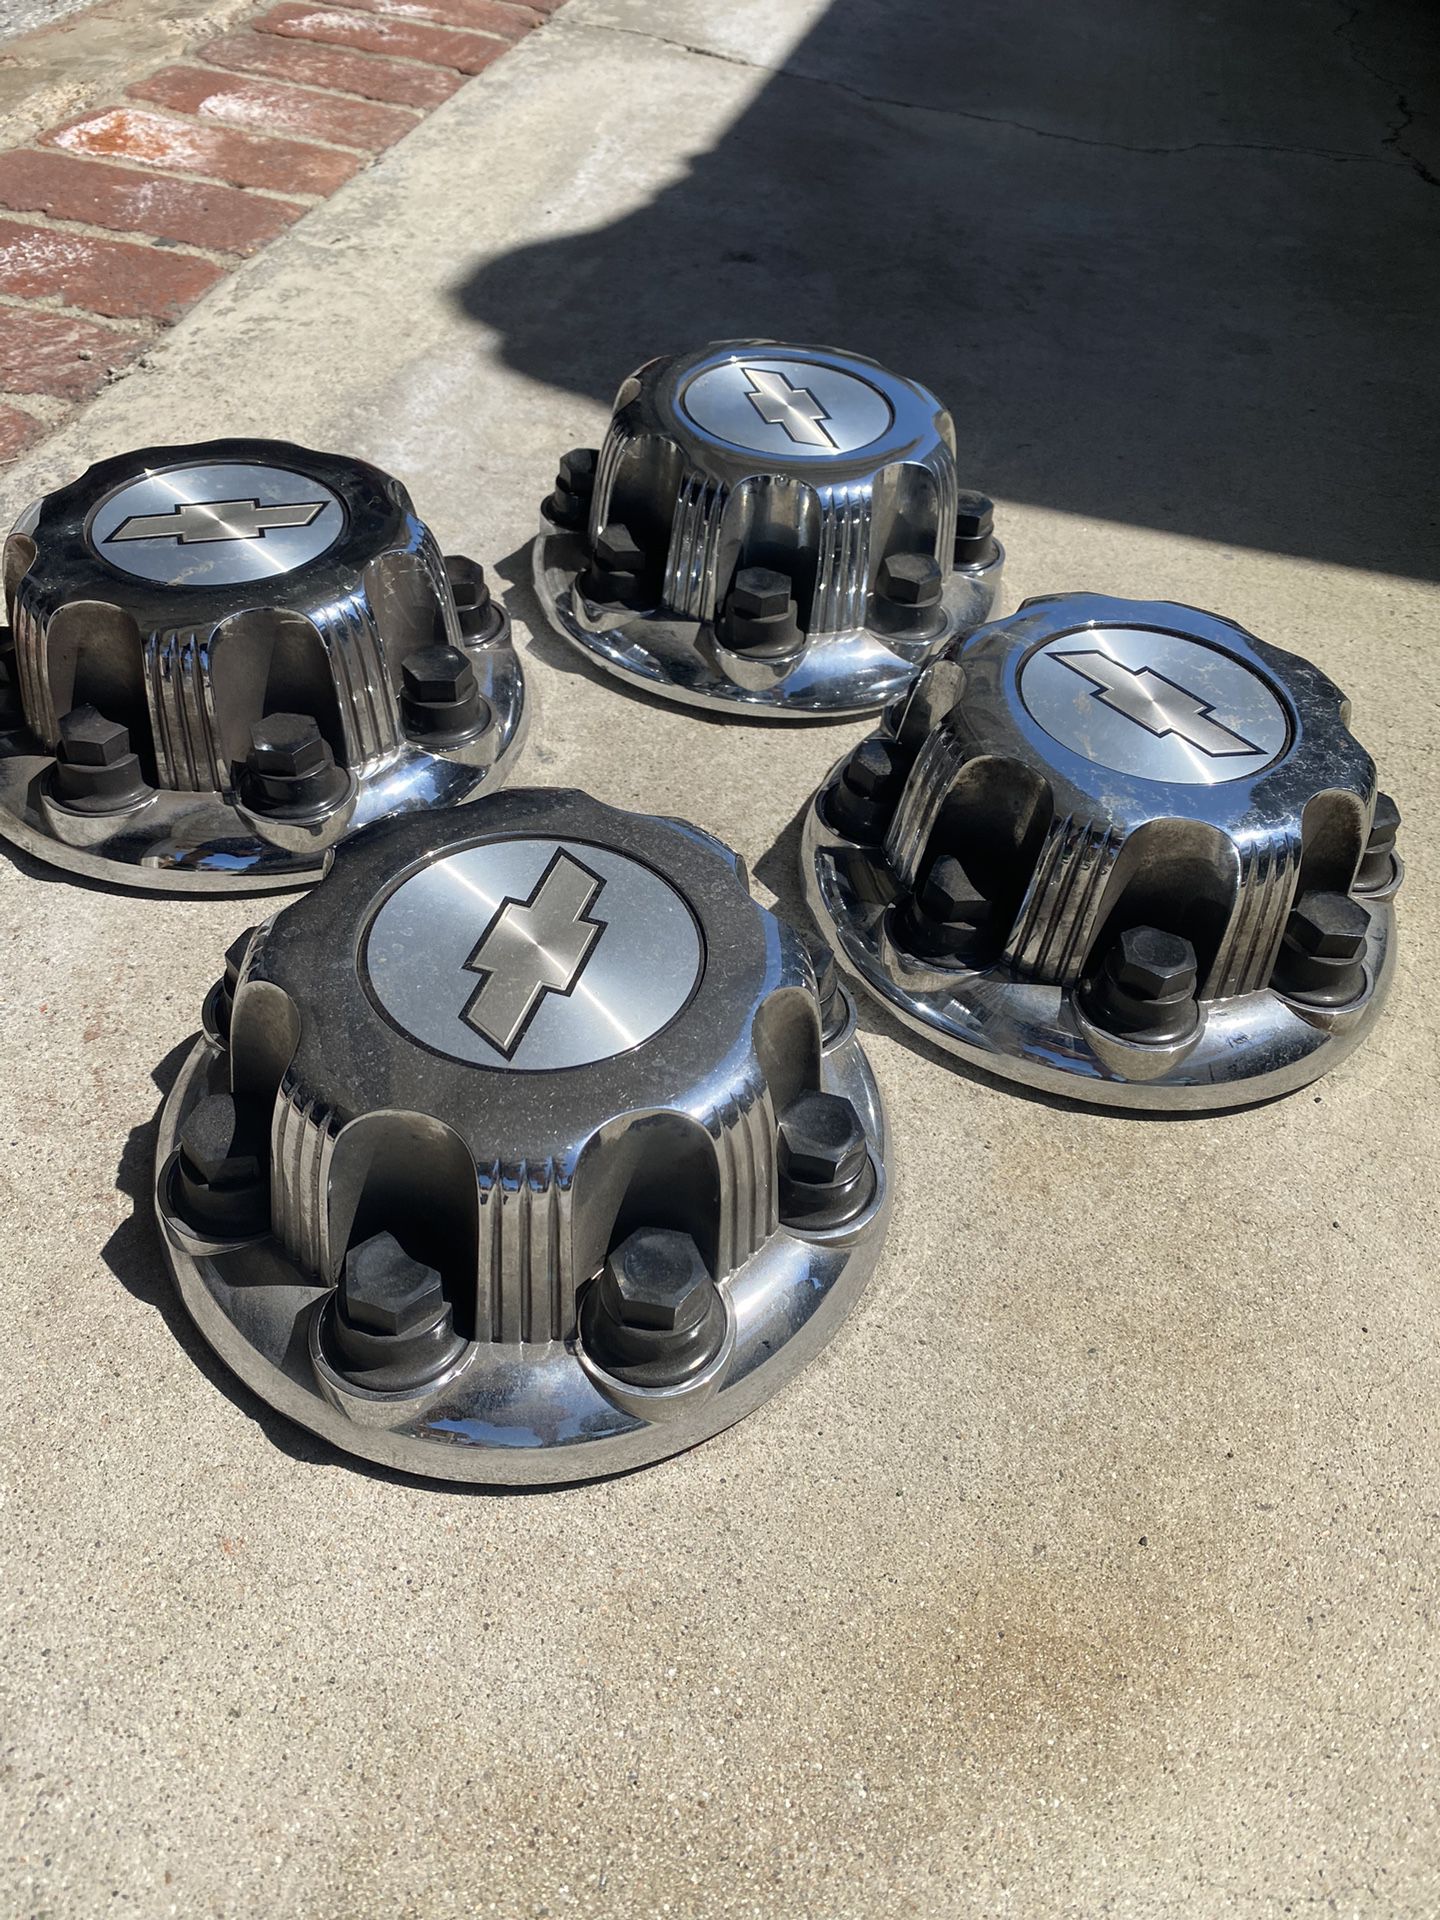 Chevy Wheel Covers